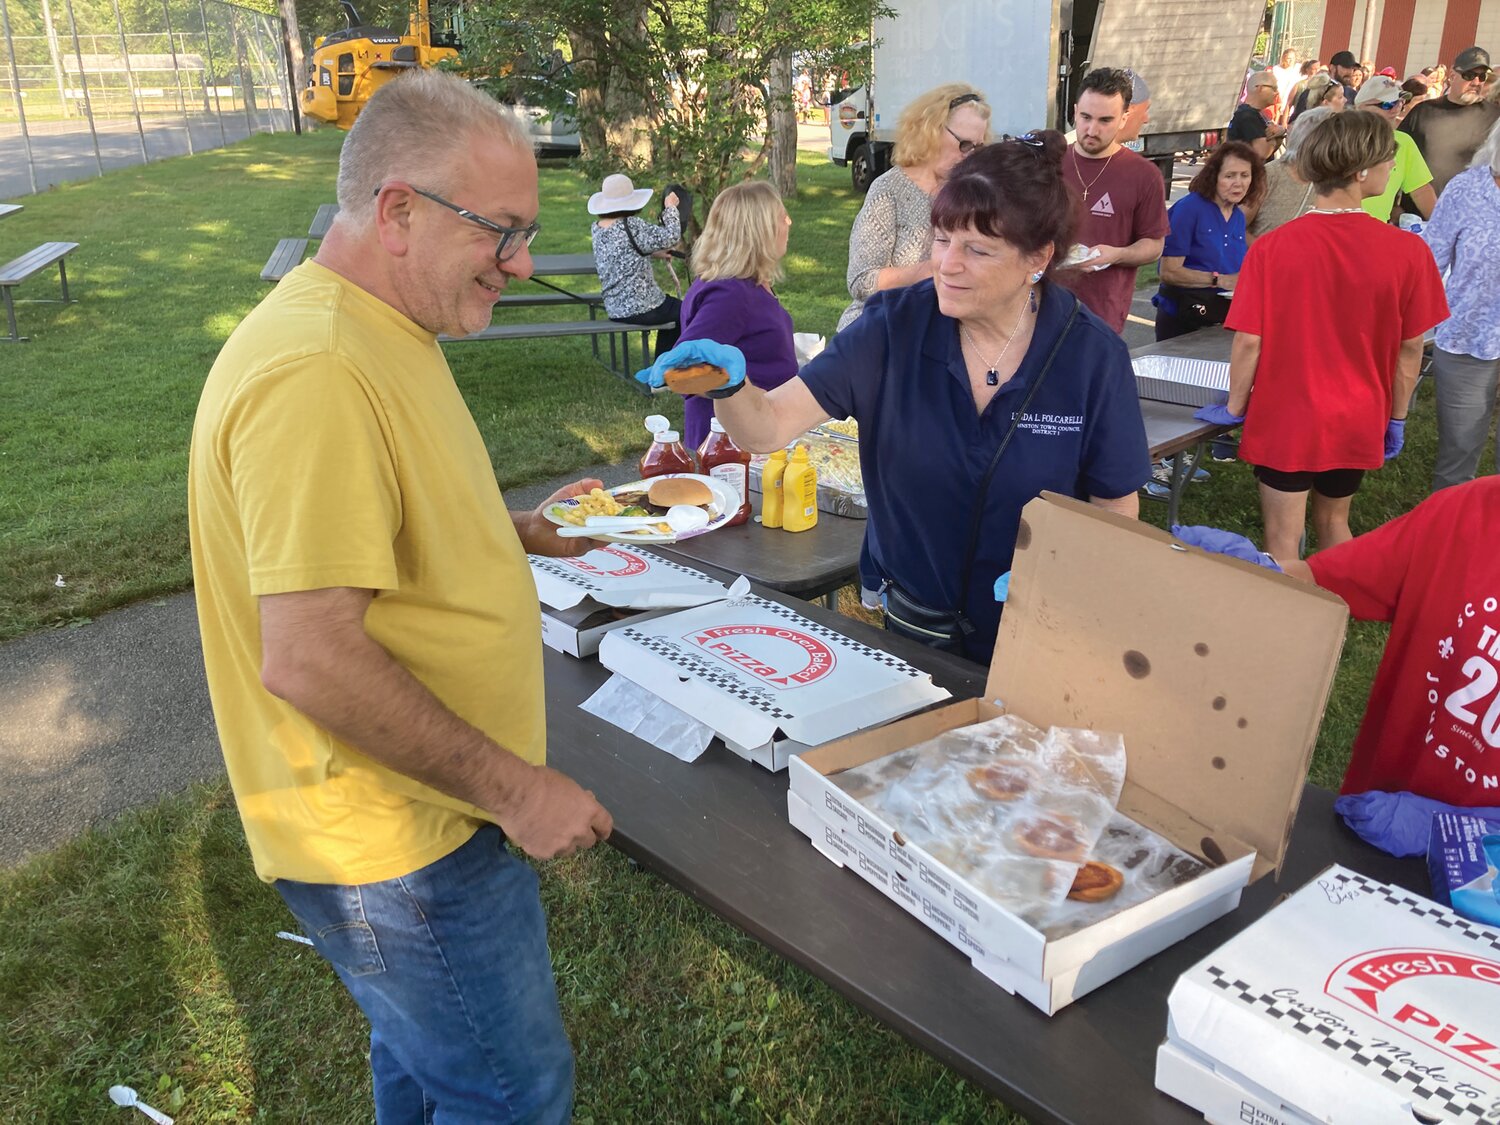 SERVING IT UP: Councilwoman Linda Folcarelli handles pizza chips from The Original Italian Bakery for hungry attendees.